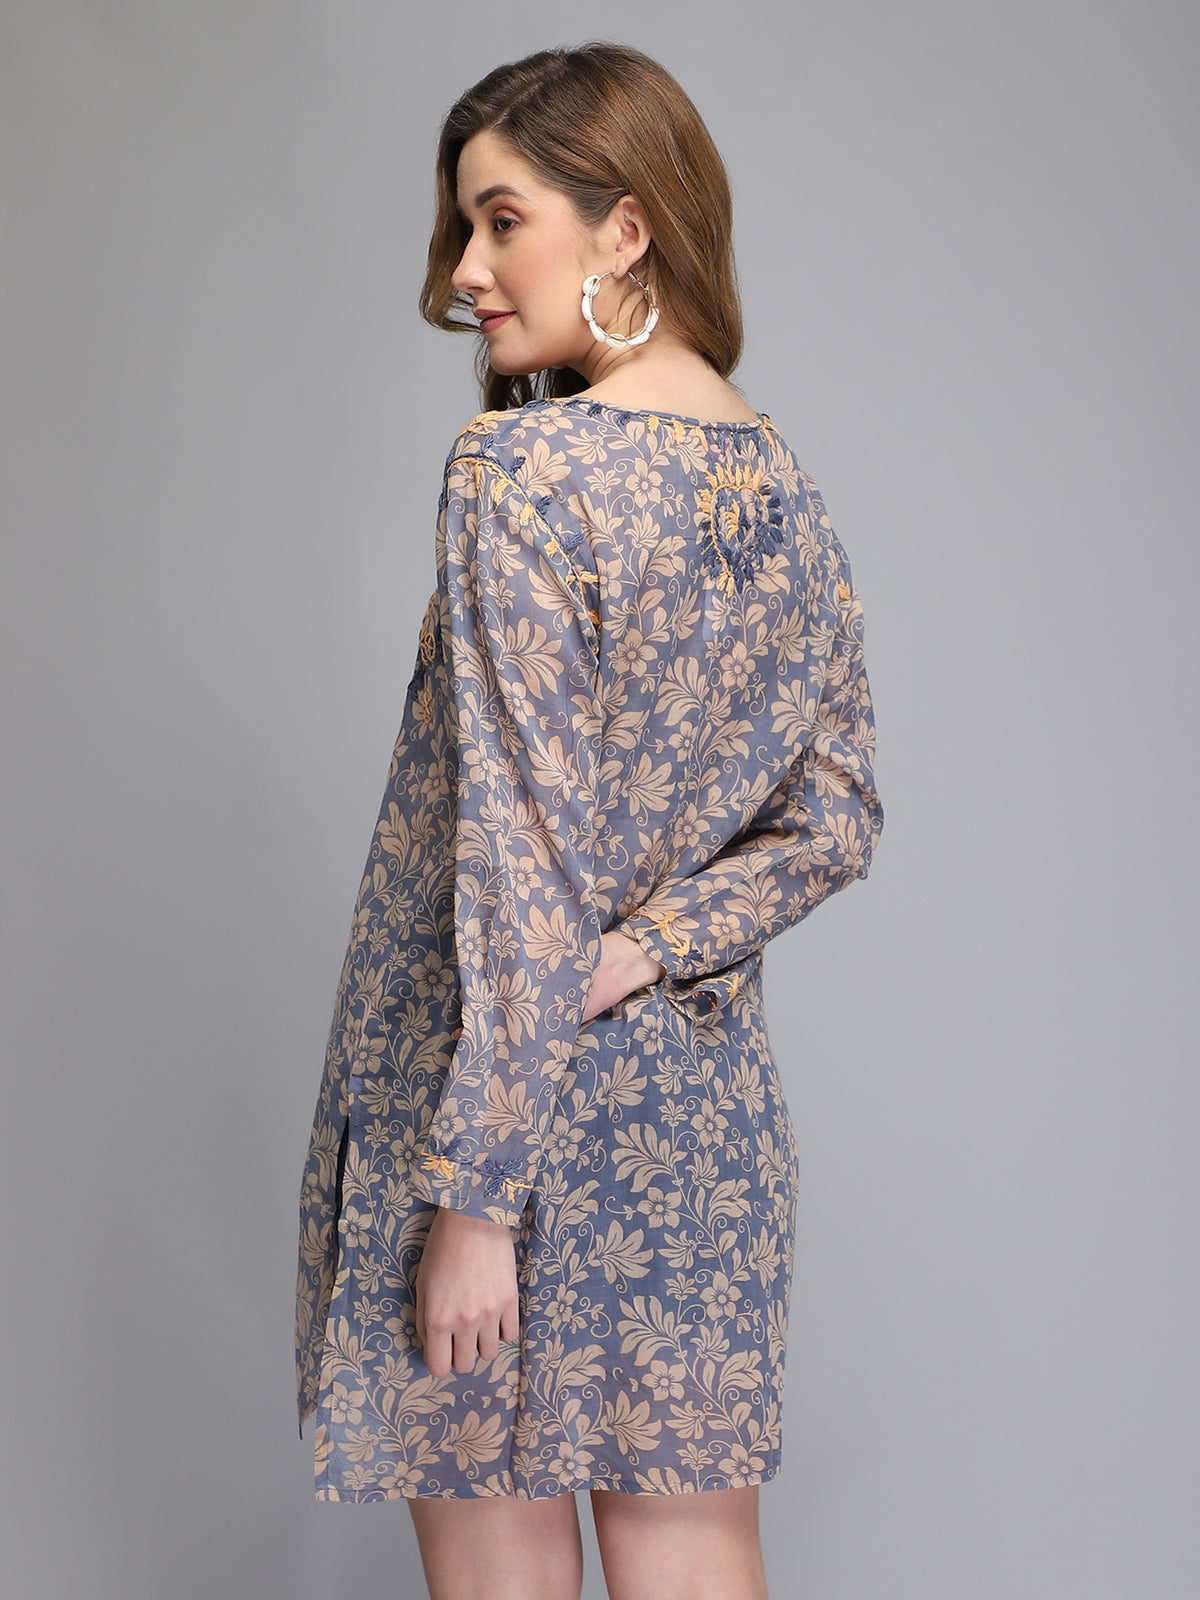 embroidered cotton tunic